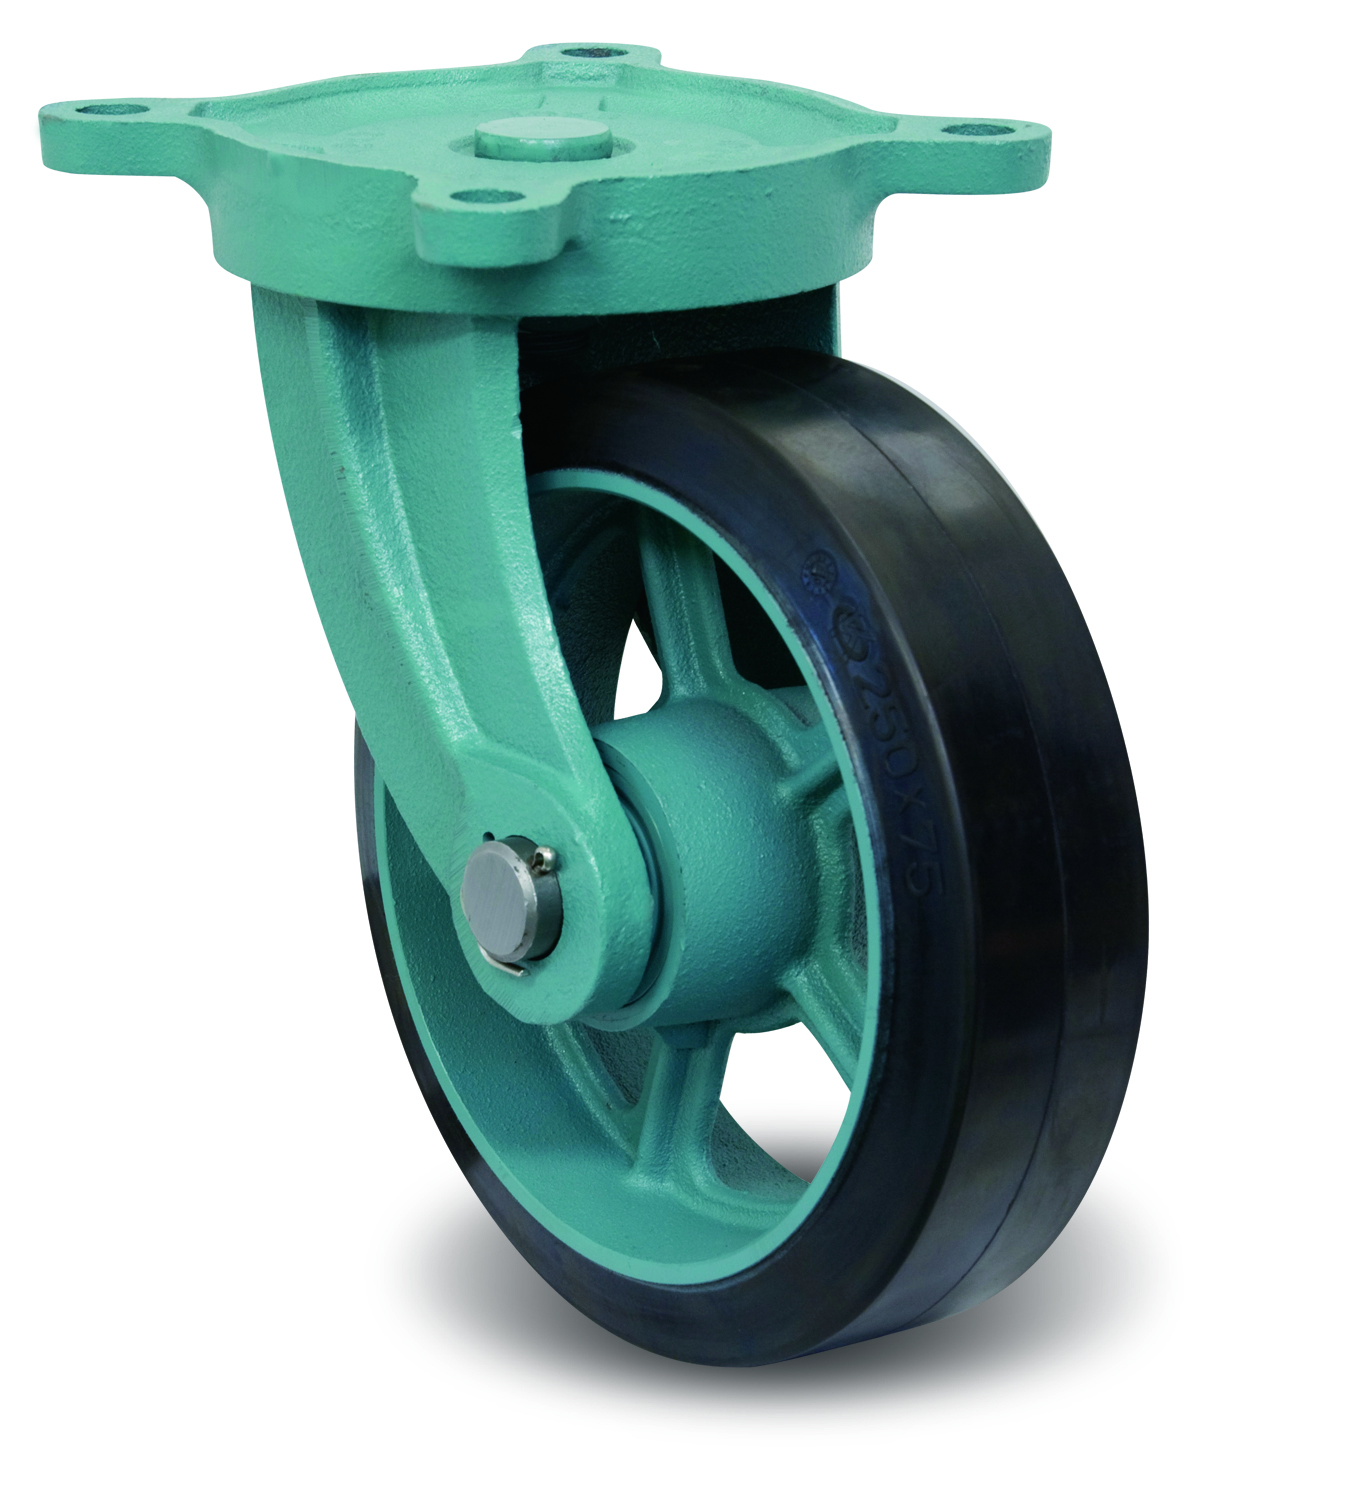 Casters - Rubber with Ductile Steel Swivel Plate, MG-O Series with Bracket, E/MG-O Series. EMG-O200X65